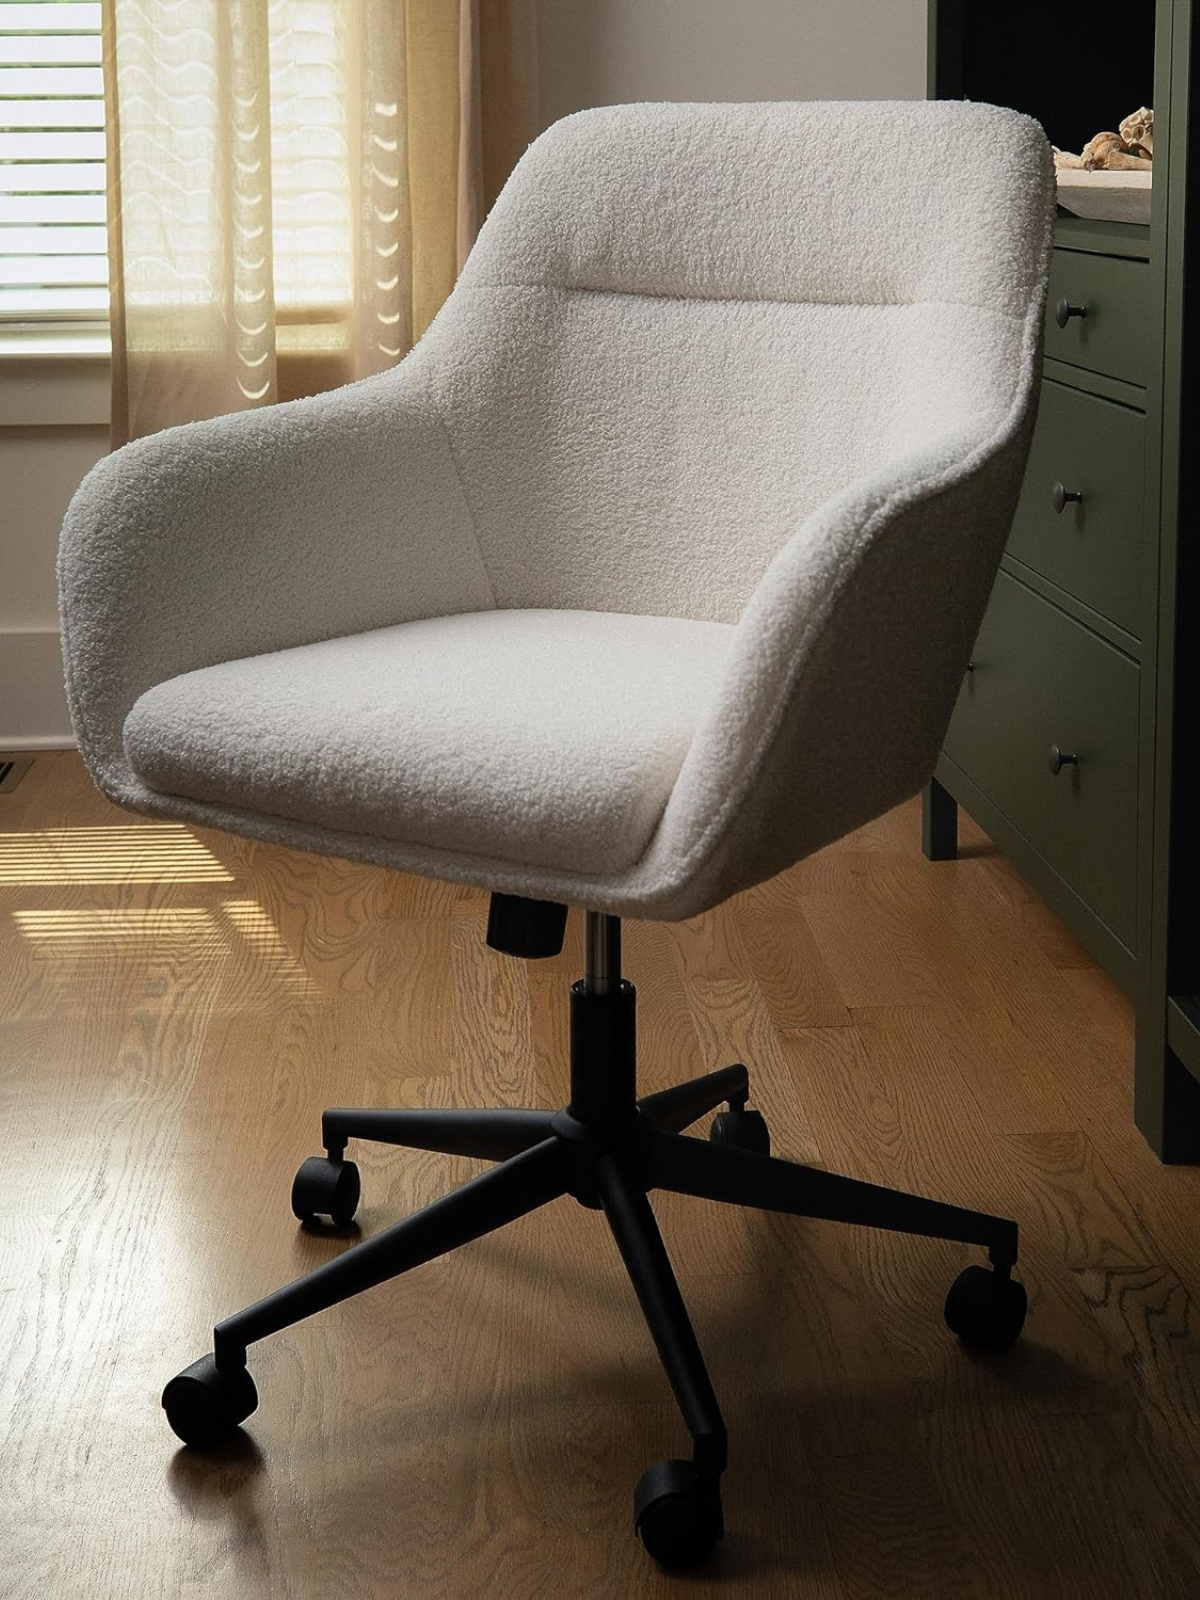 MARTHA STEWART Rayna Upholstered Office Chair, Set of 1, White Boucle/Oil Rubbed